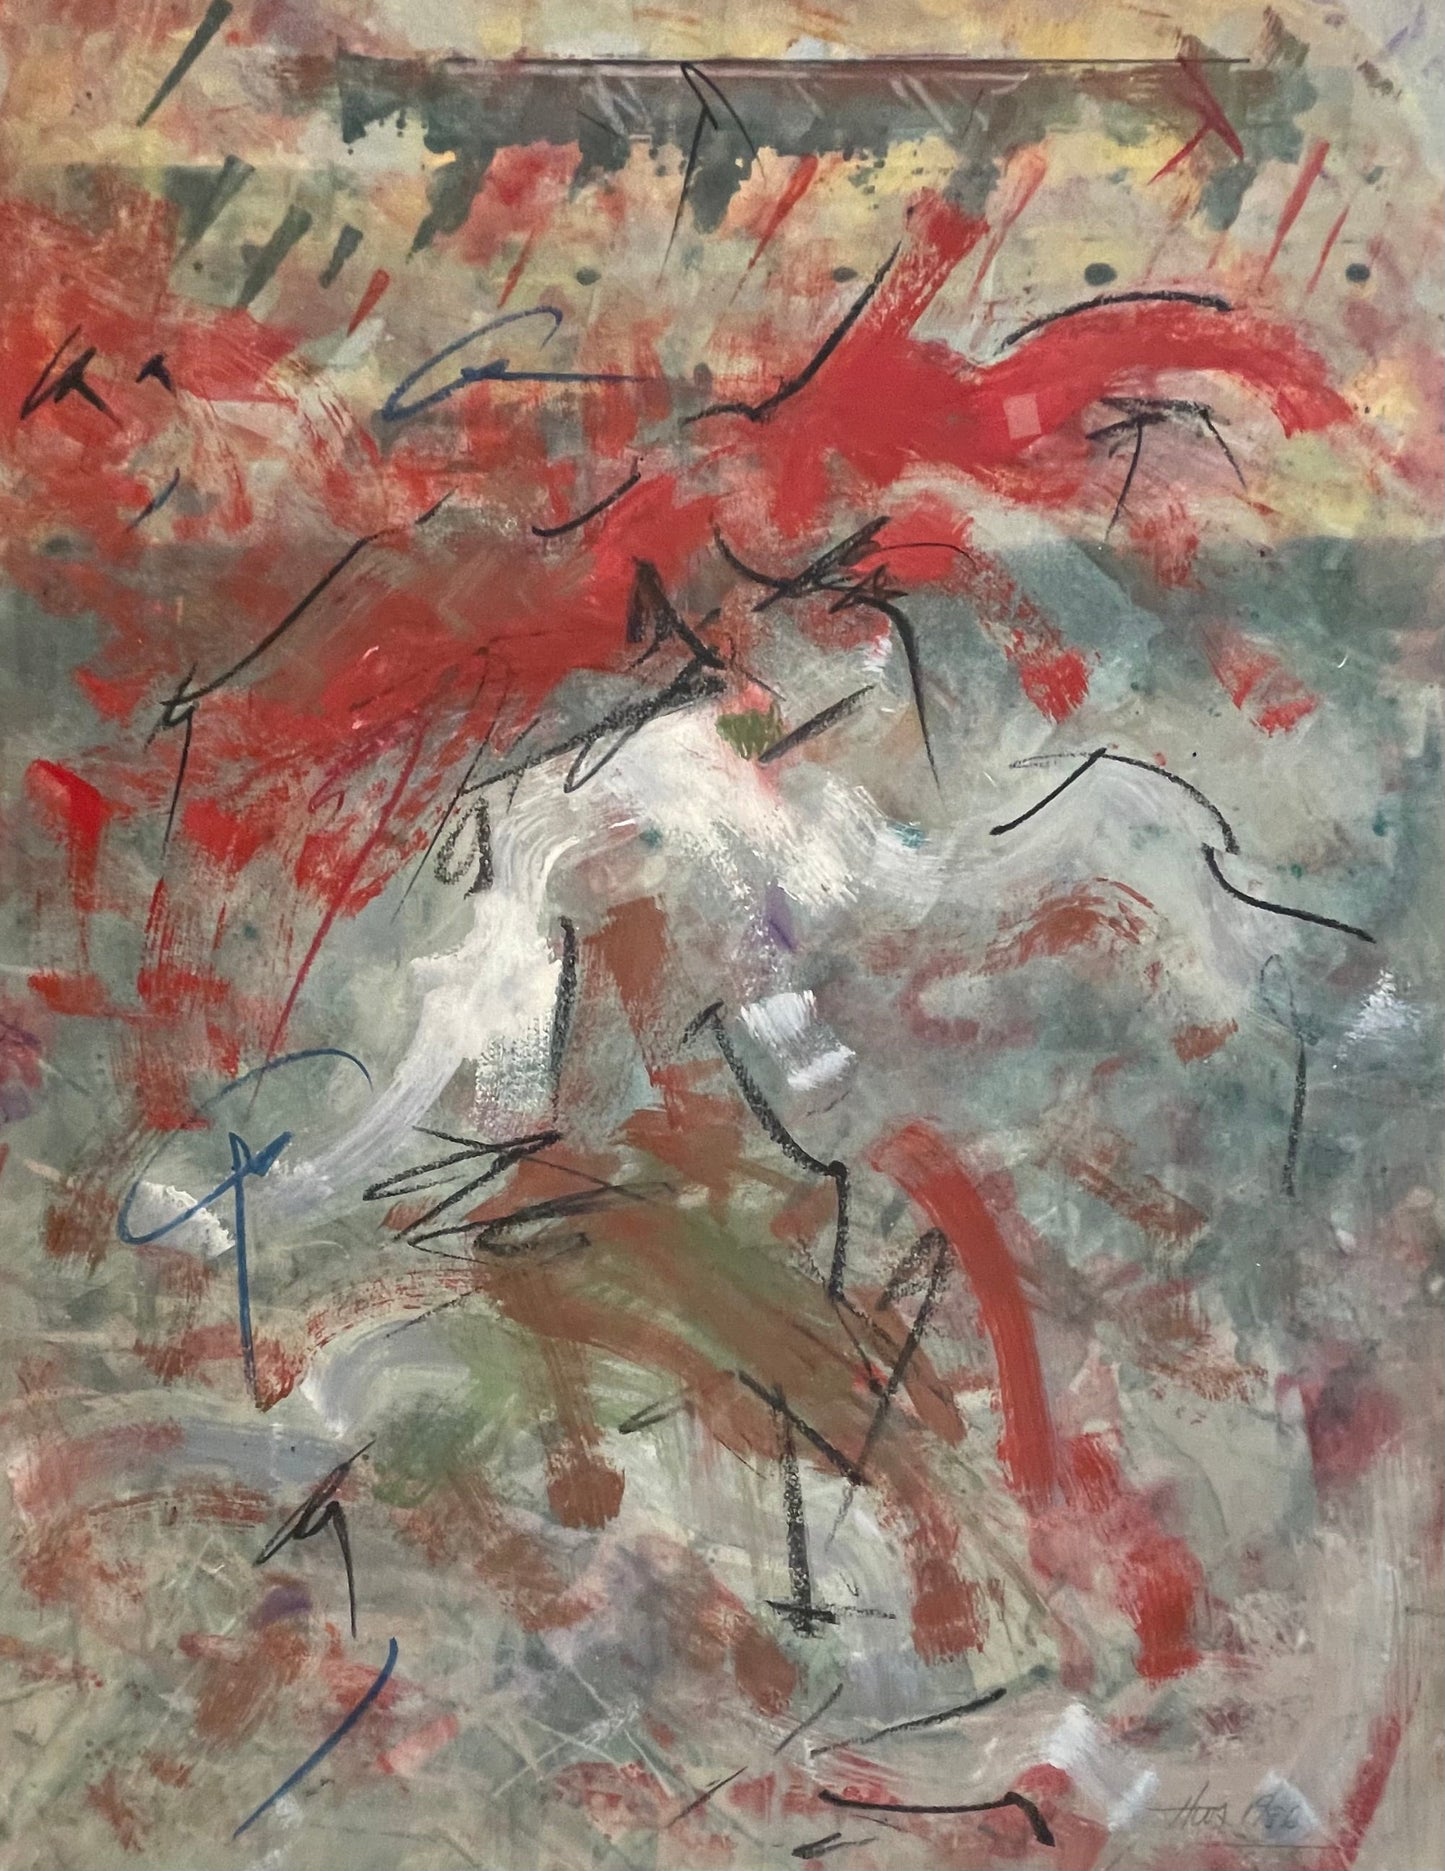 "Red Abstract", Red, White, and Gray Abstract Painting